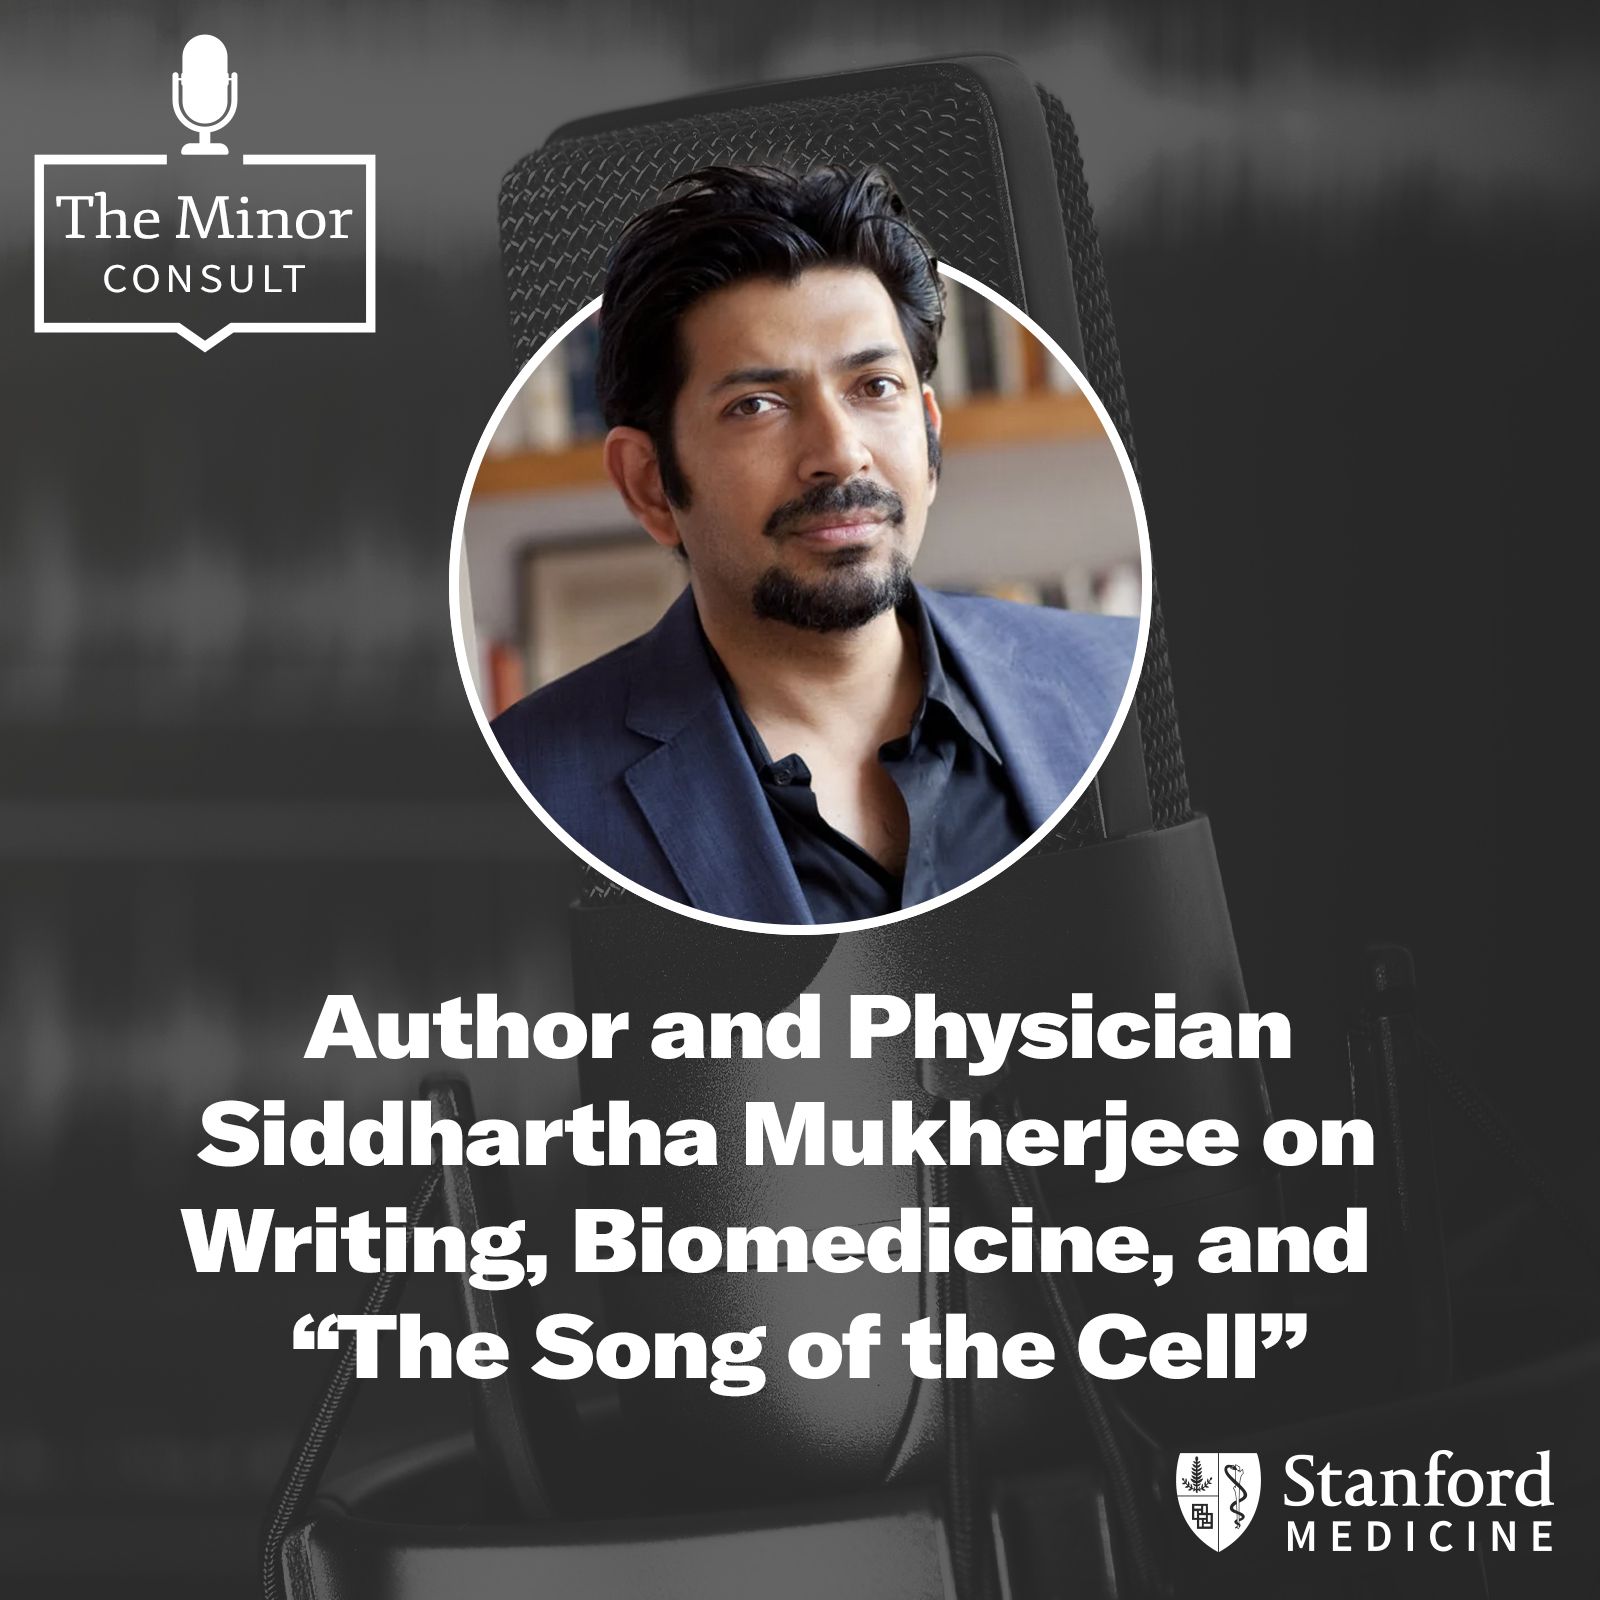 S3 Ep5: Author & Physician Siddhartha Mukherjee on Writing, Biomedicine, & “The Song of the Cell”